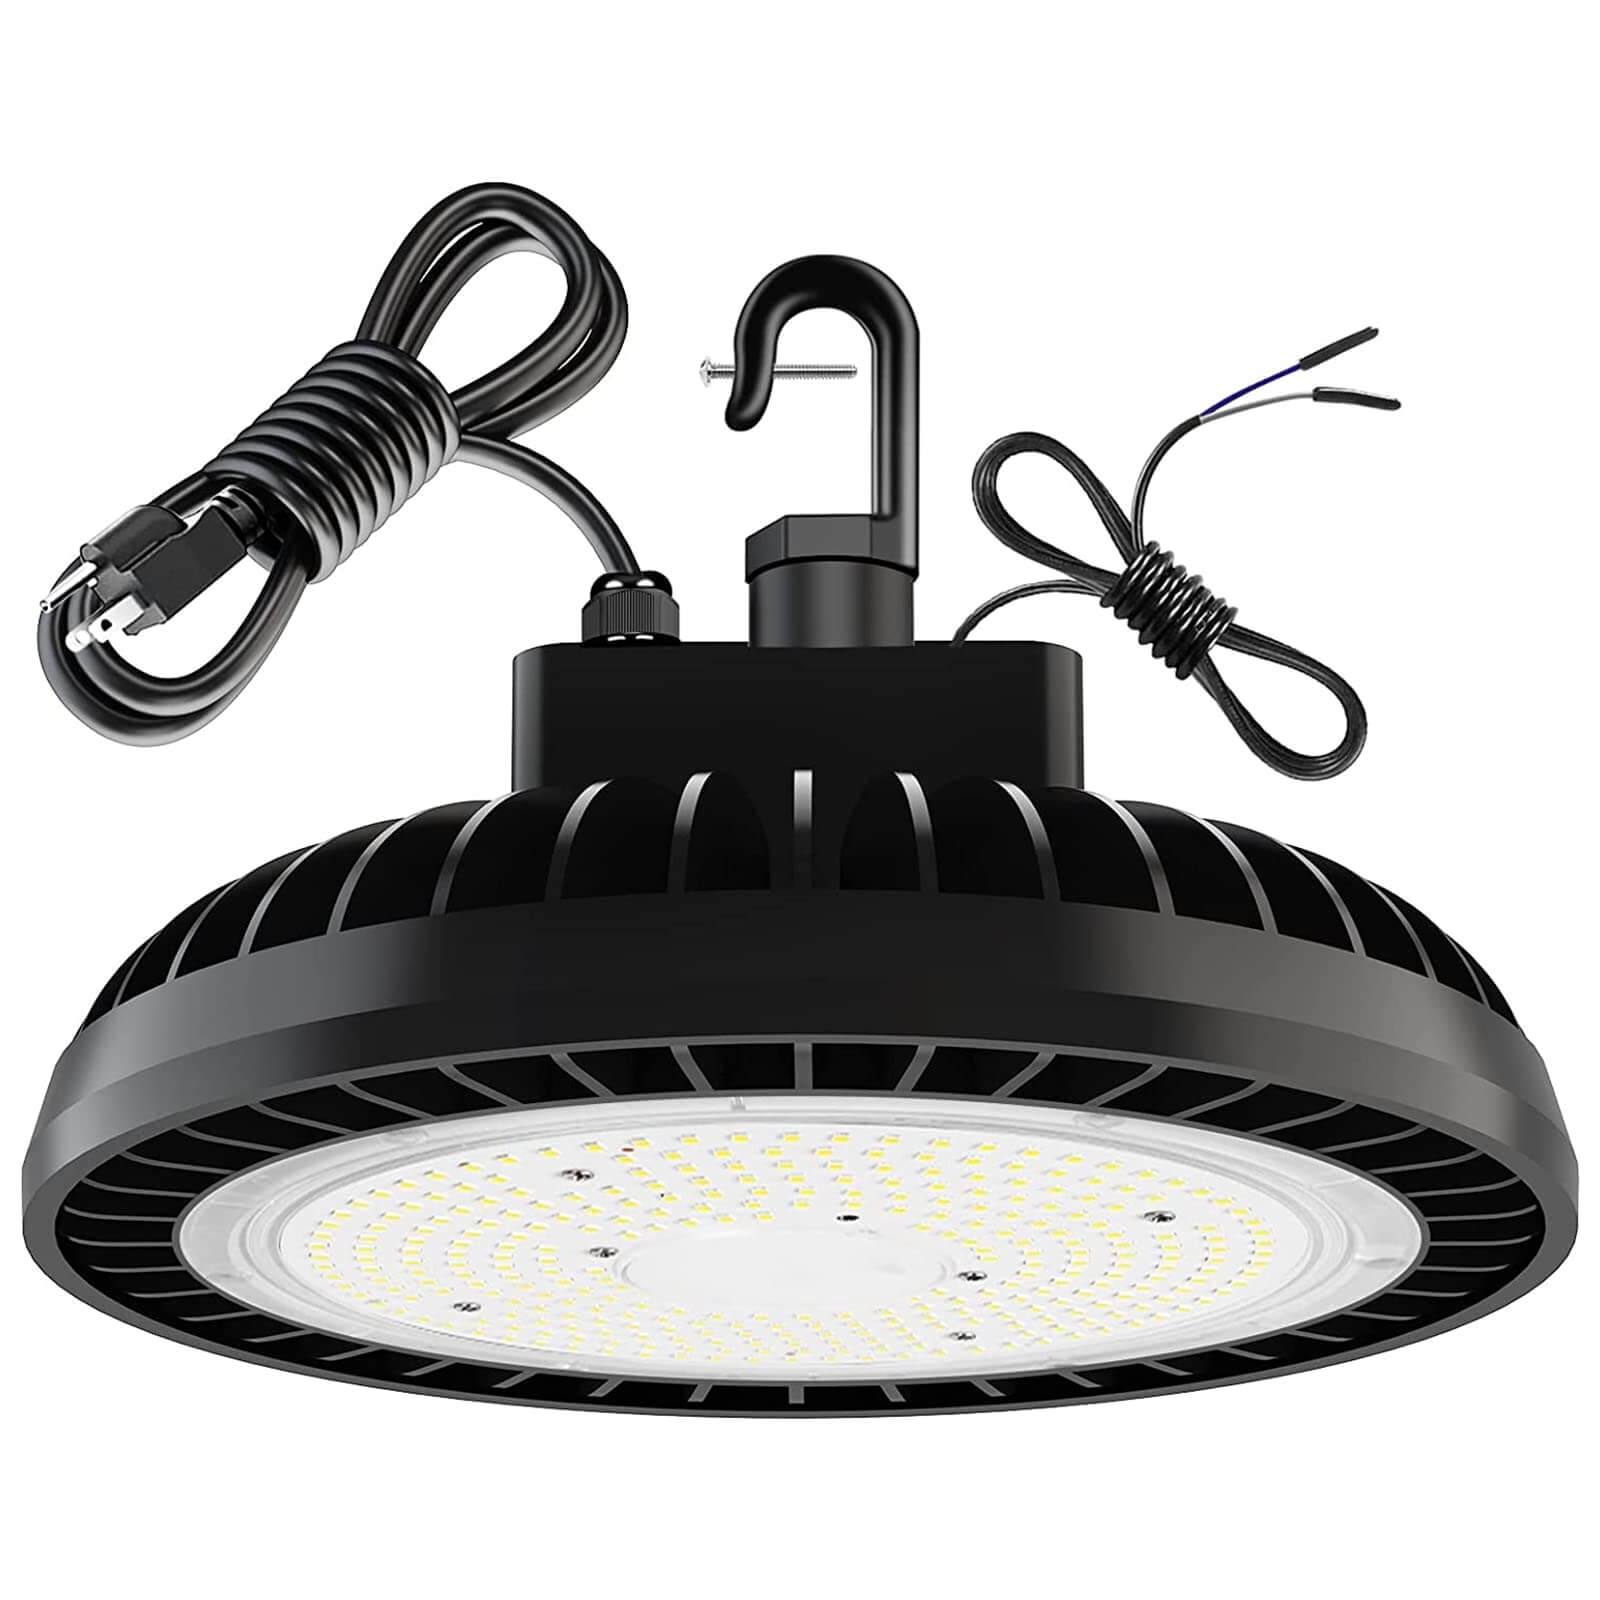 Experience the Comfort of Light with CINOTON LED